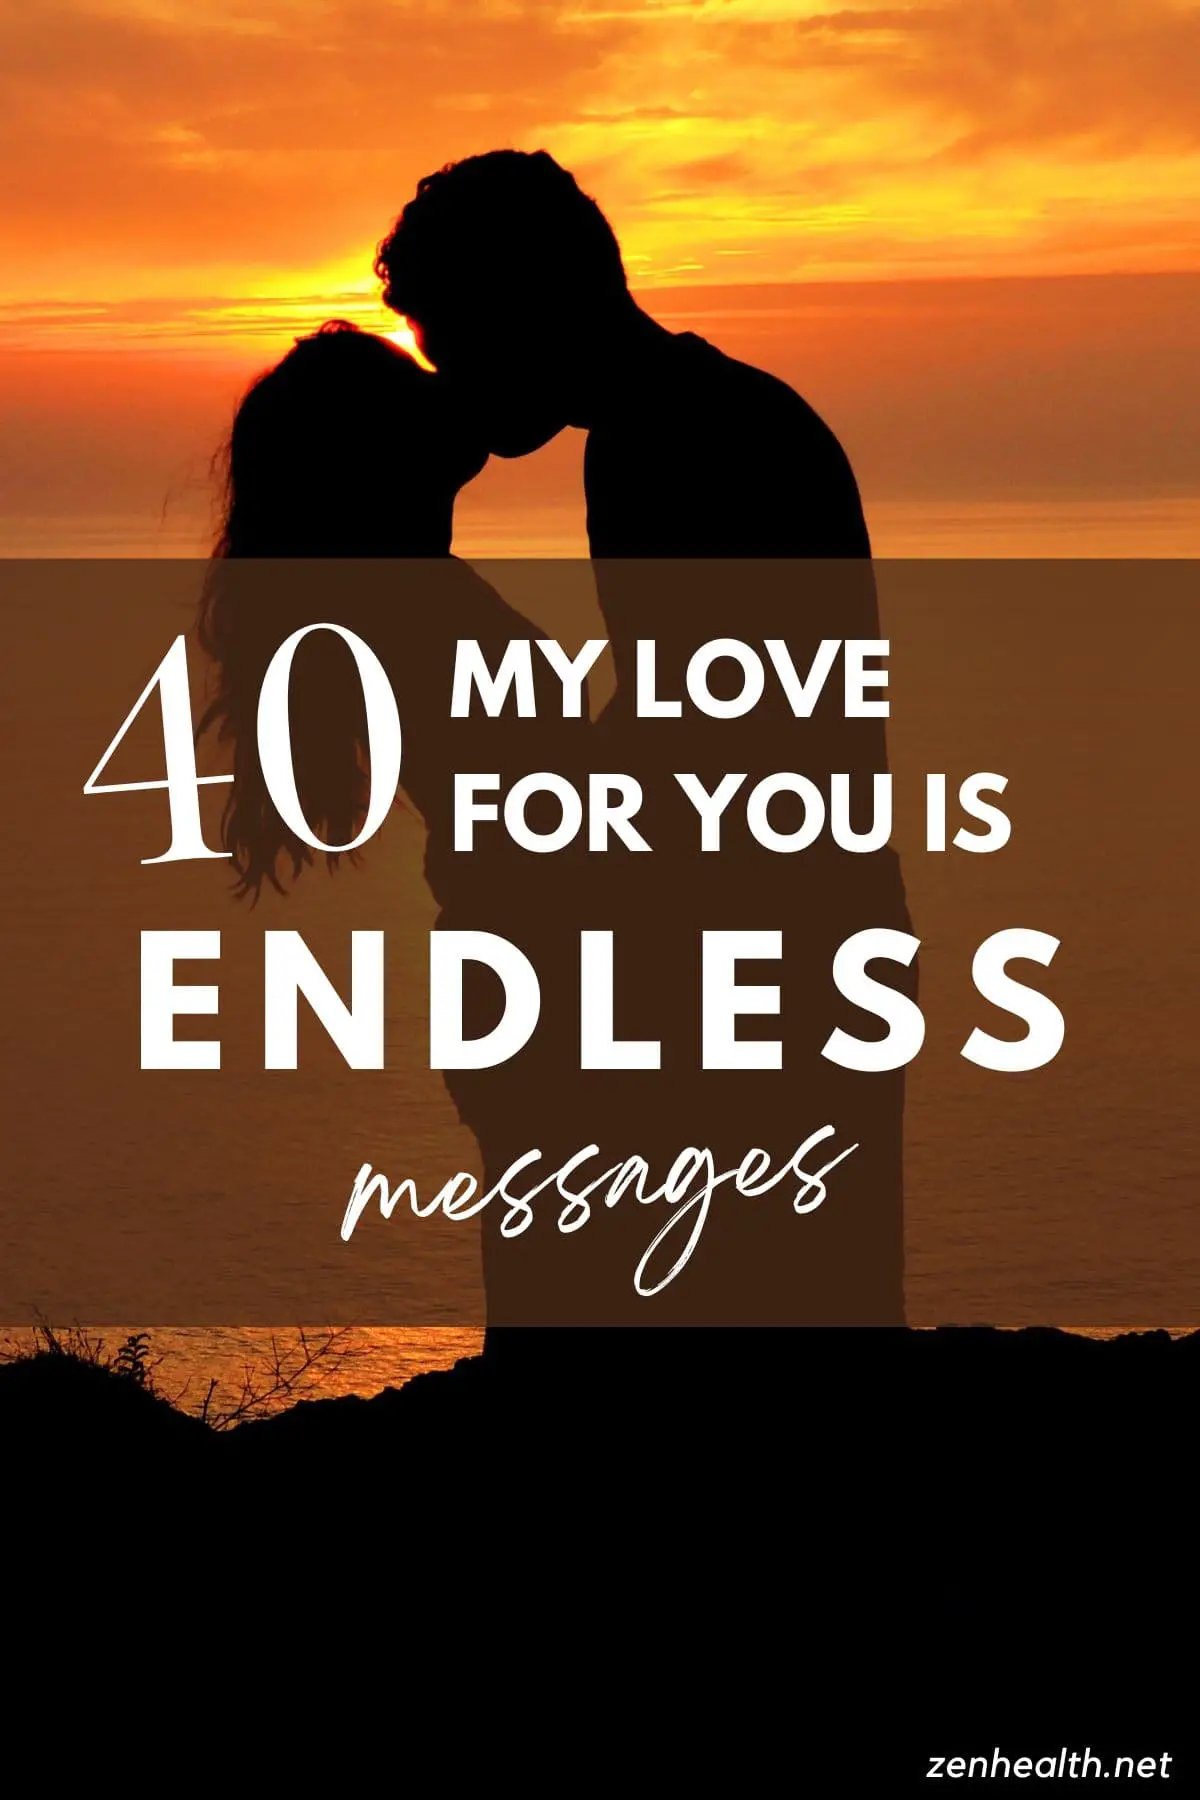 40 my love for you is endless messages text over a couple kissing in the darkness with a glowing yellow sunset in the background by the sea